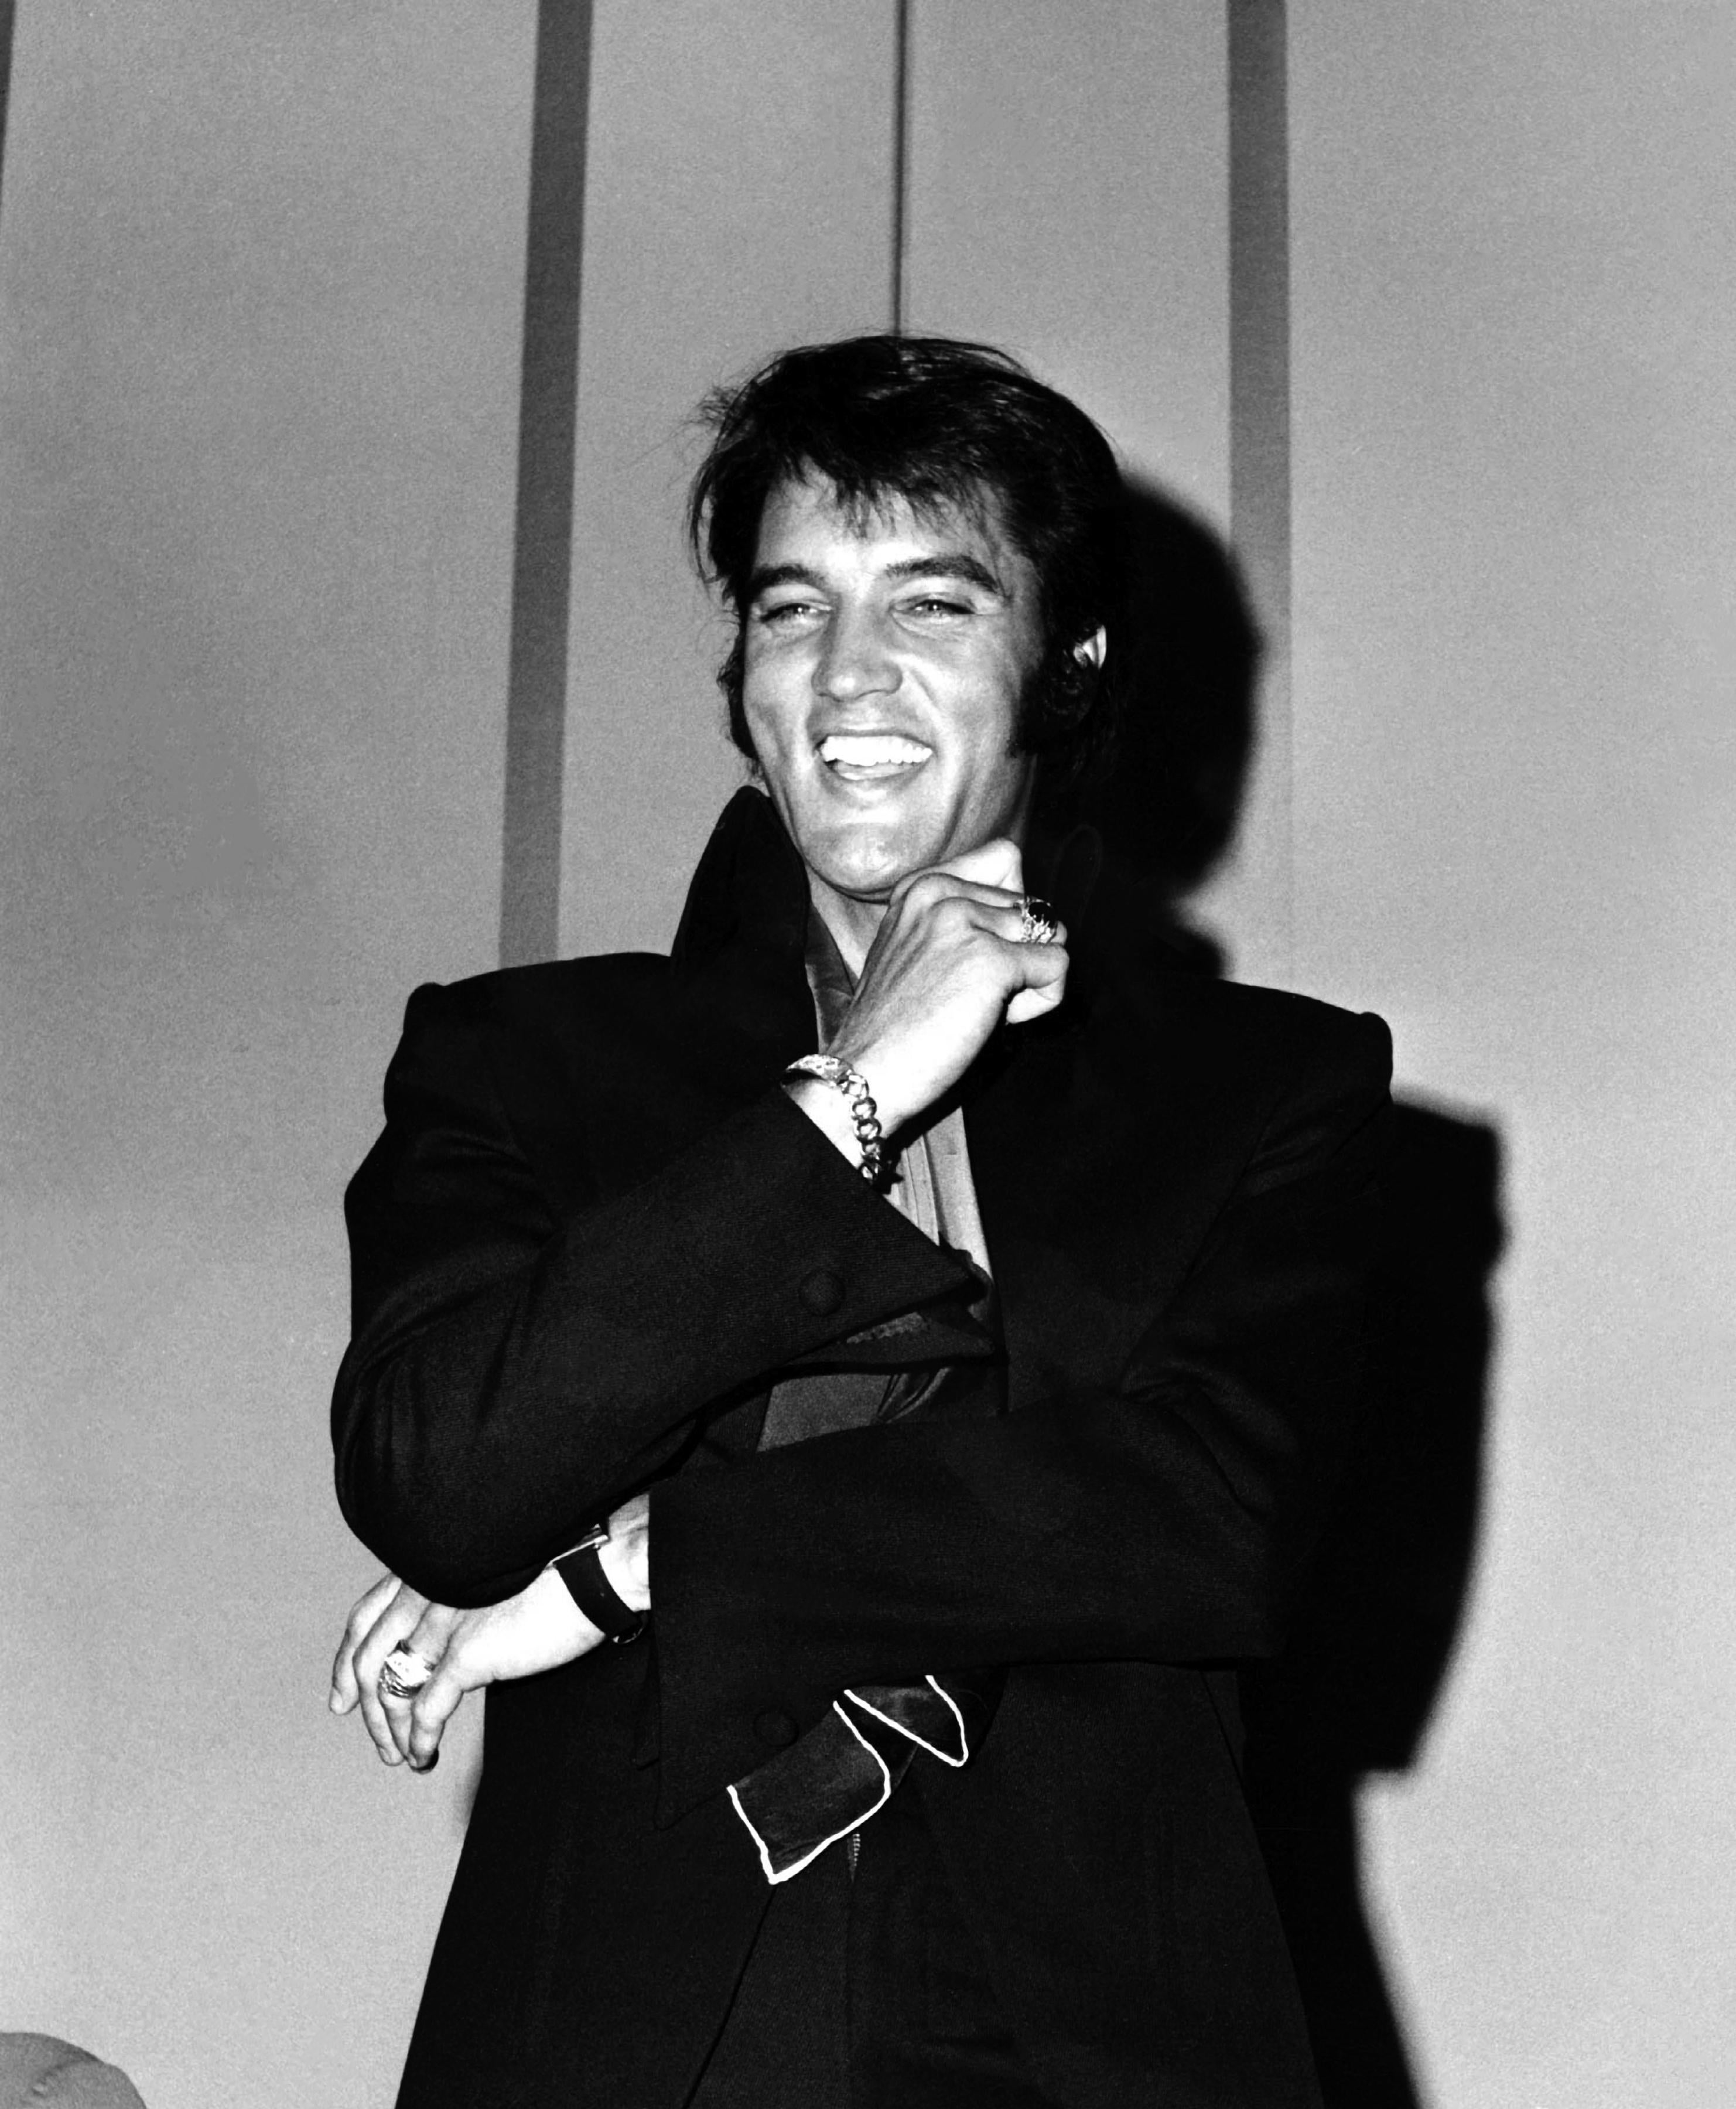 Phil Roach Black and White Photograph - Elvis Laughing at a Press Conference Fine Art Print